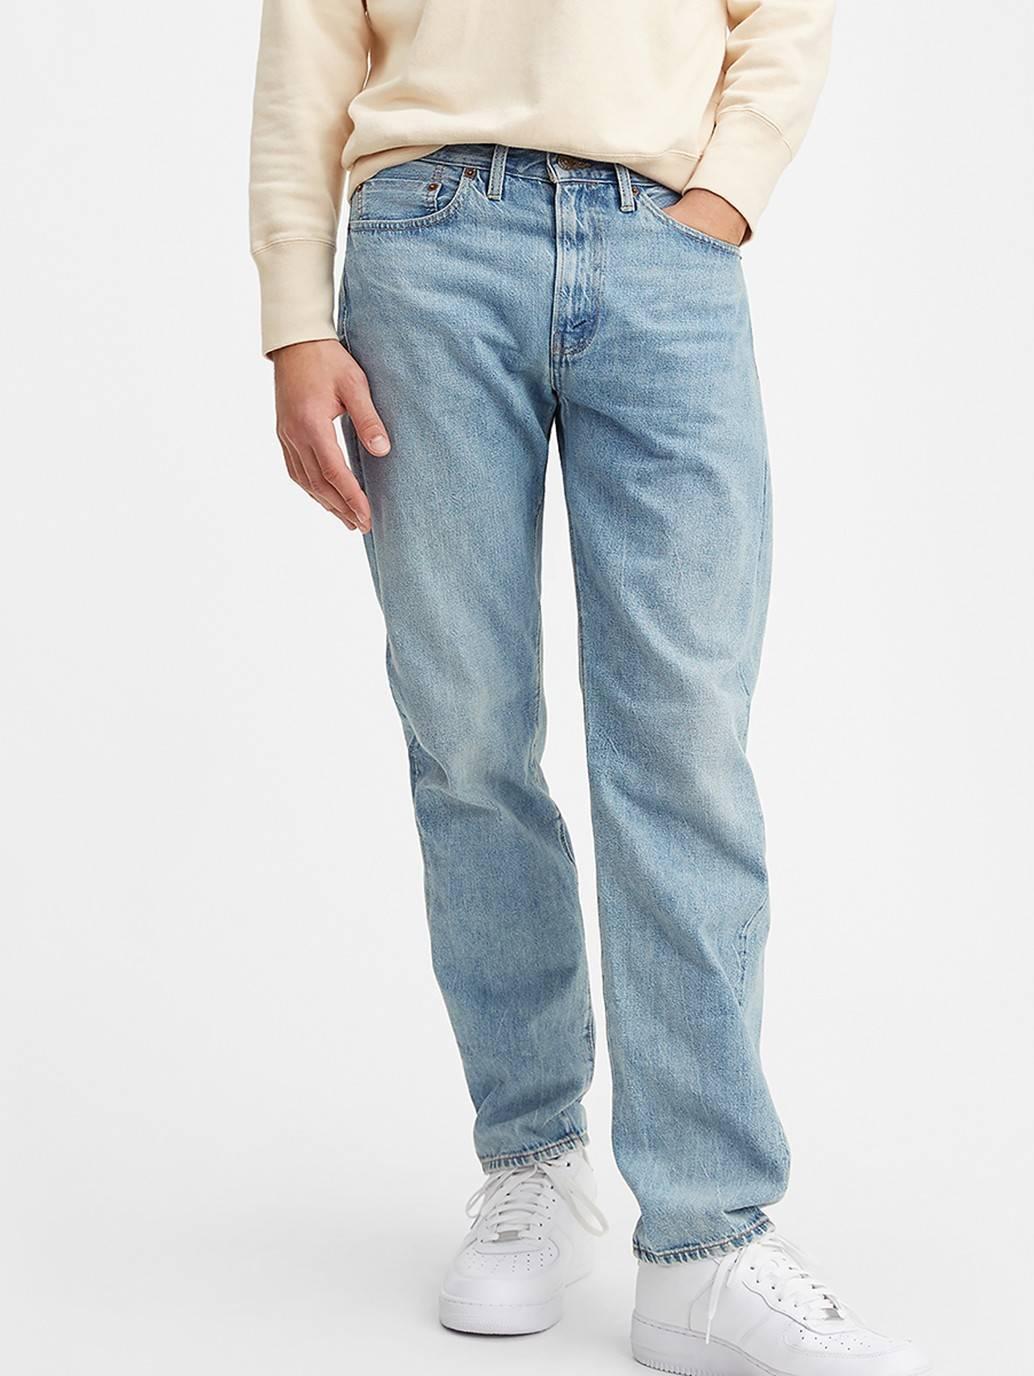 Buy 1954 501® Jeans Levi’s® Official Online Store MY